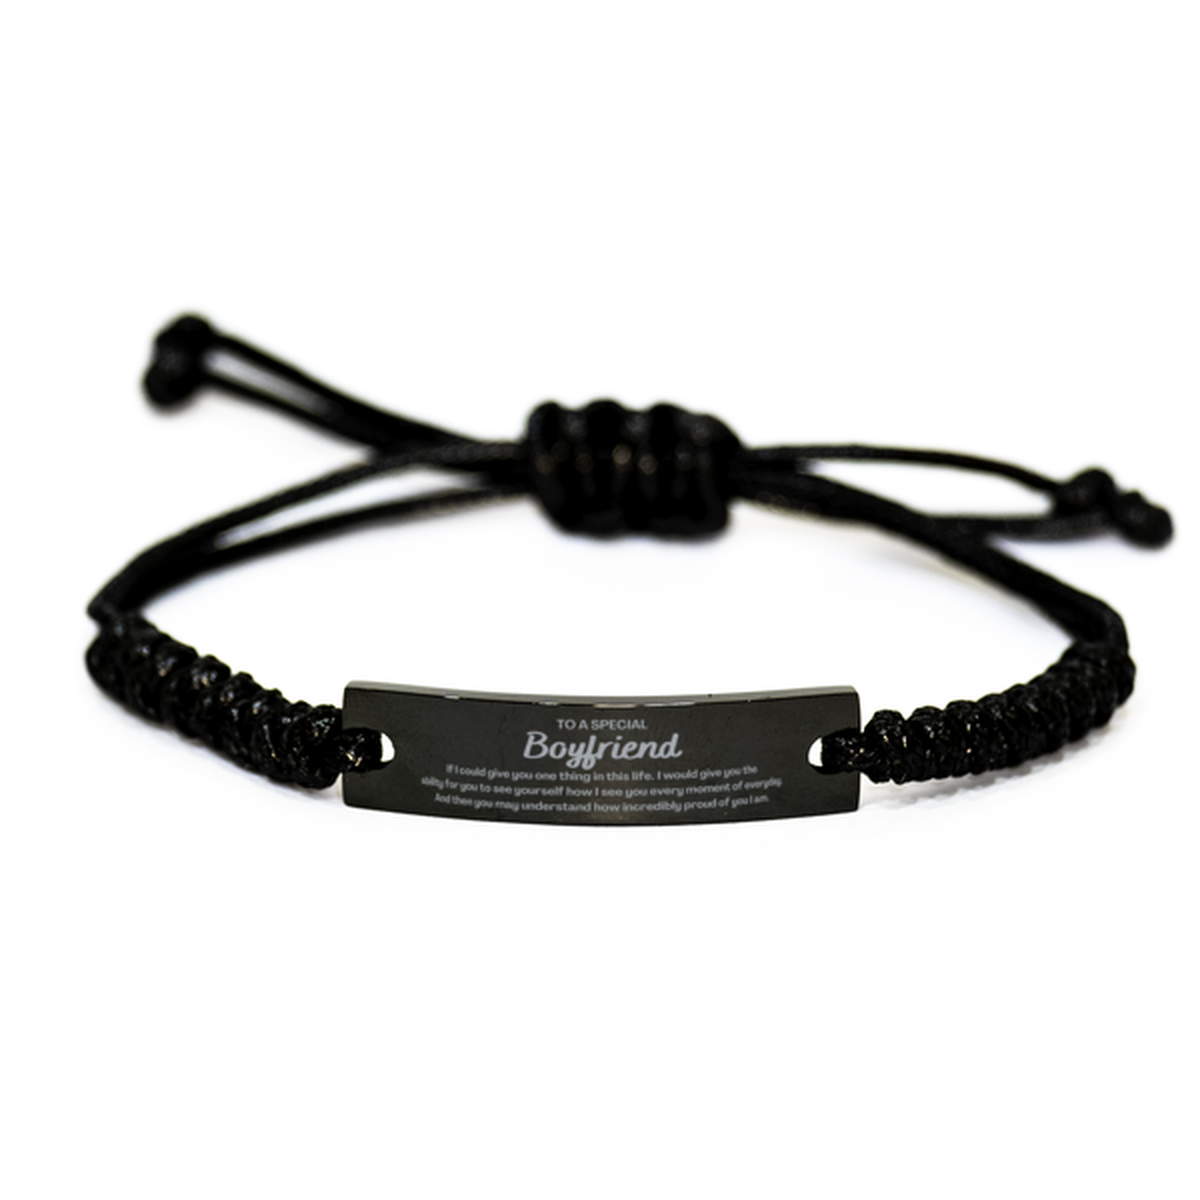 To My Boyfriend Black Rope Bracelet, Gifts For Boyfriend Engraved, Inspirational Gifts for Christmas Birthday, Epic Gifts for Boyfriend To A Special Boyfriend how incredibly proud of you I am